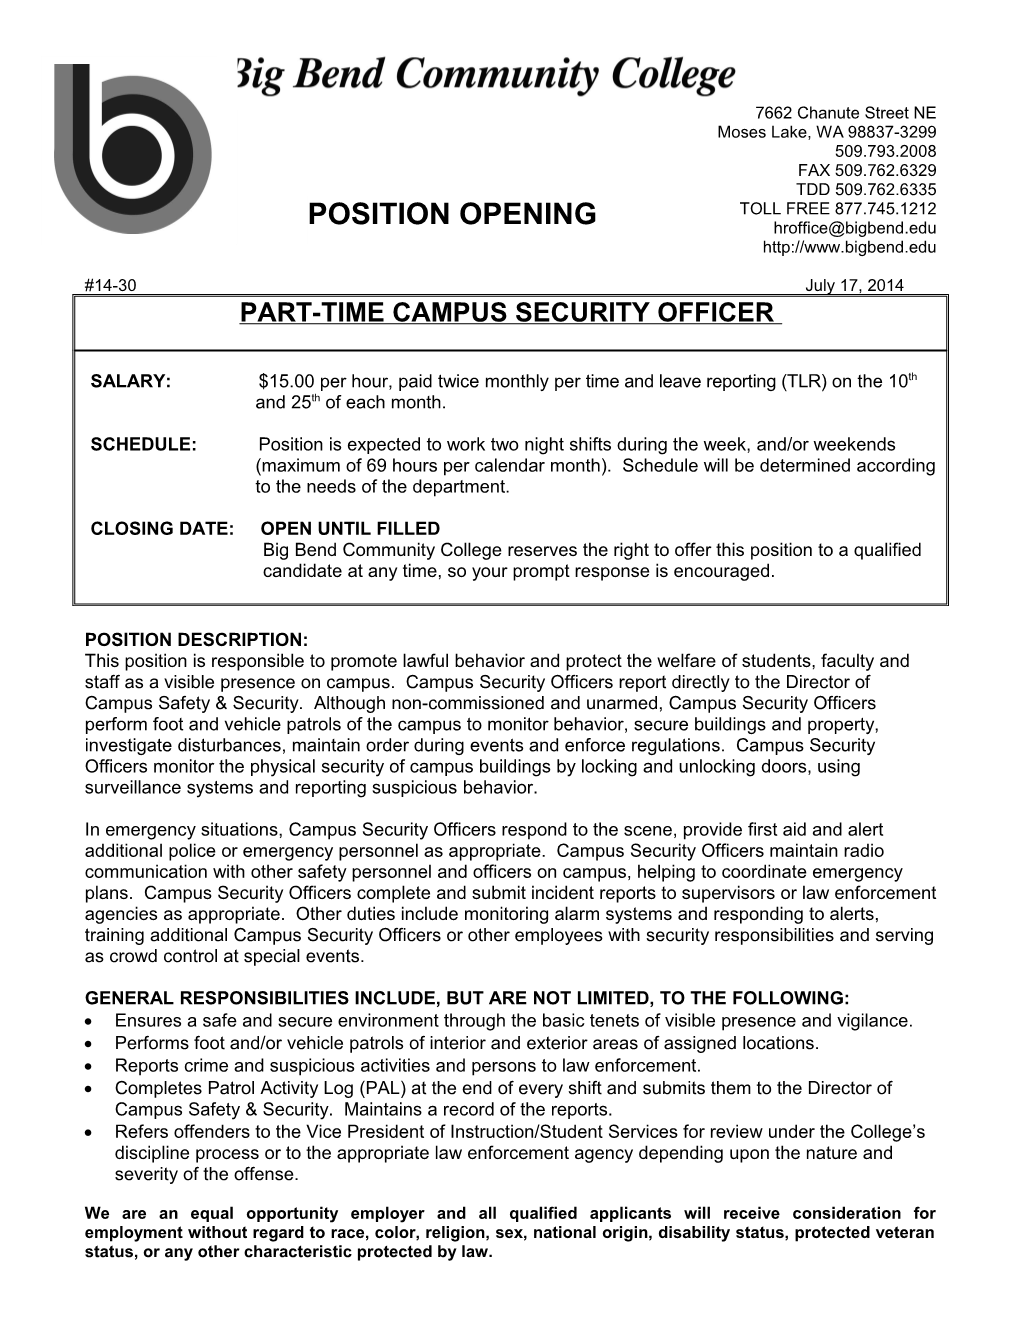 Part-Time Campus Security Officer